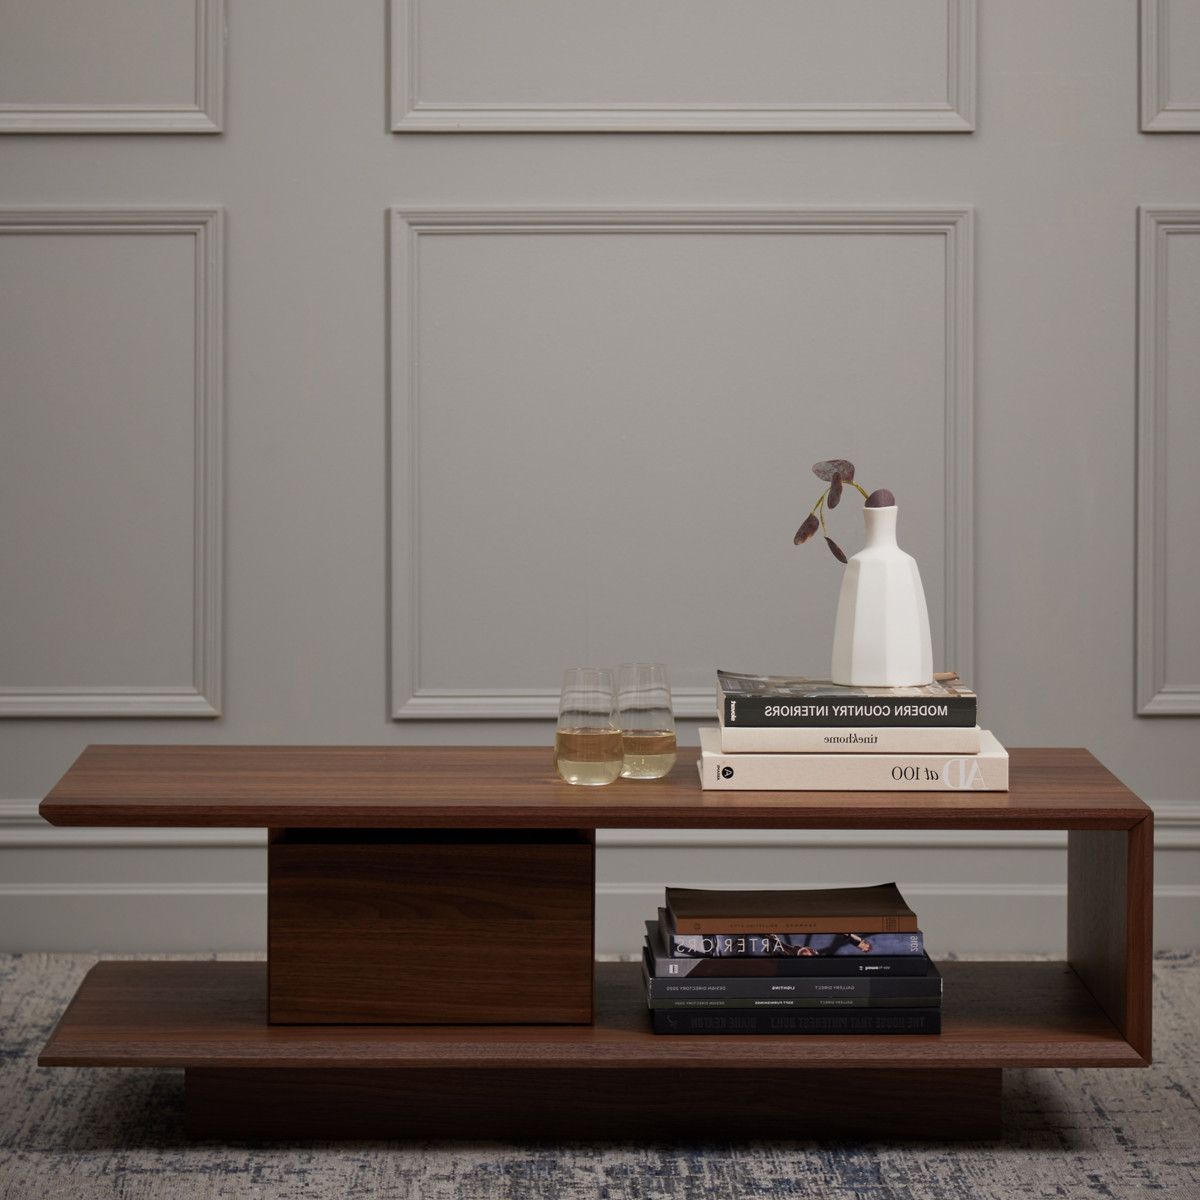 Fashionable Simple Design Coffee Tables Throughout Carla Coffee Table │ Meadows & Byrne (View 3 of 10)